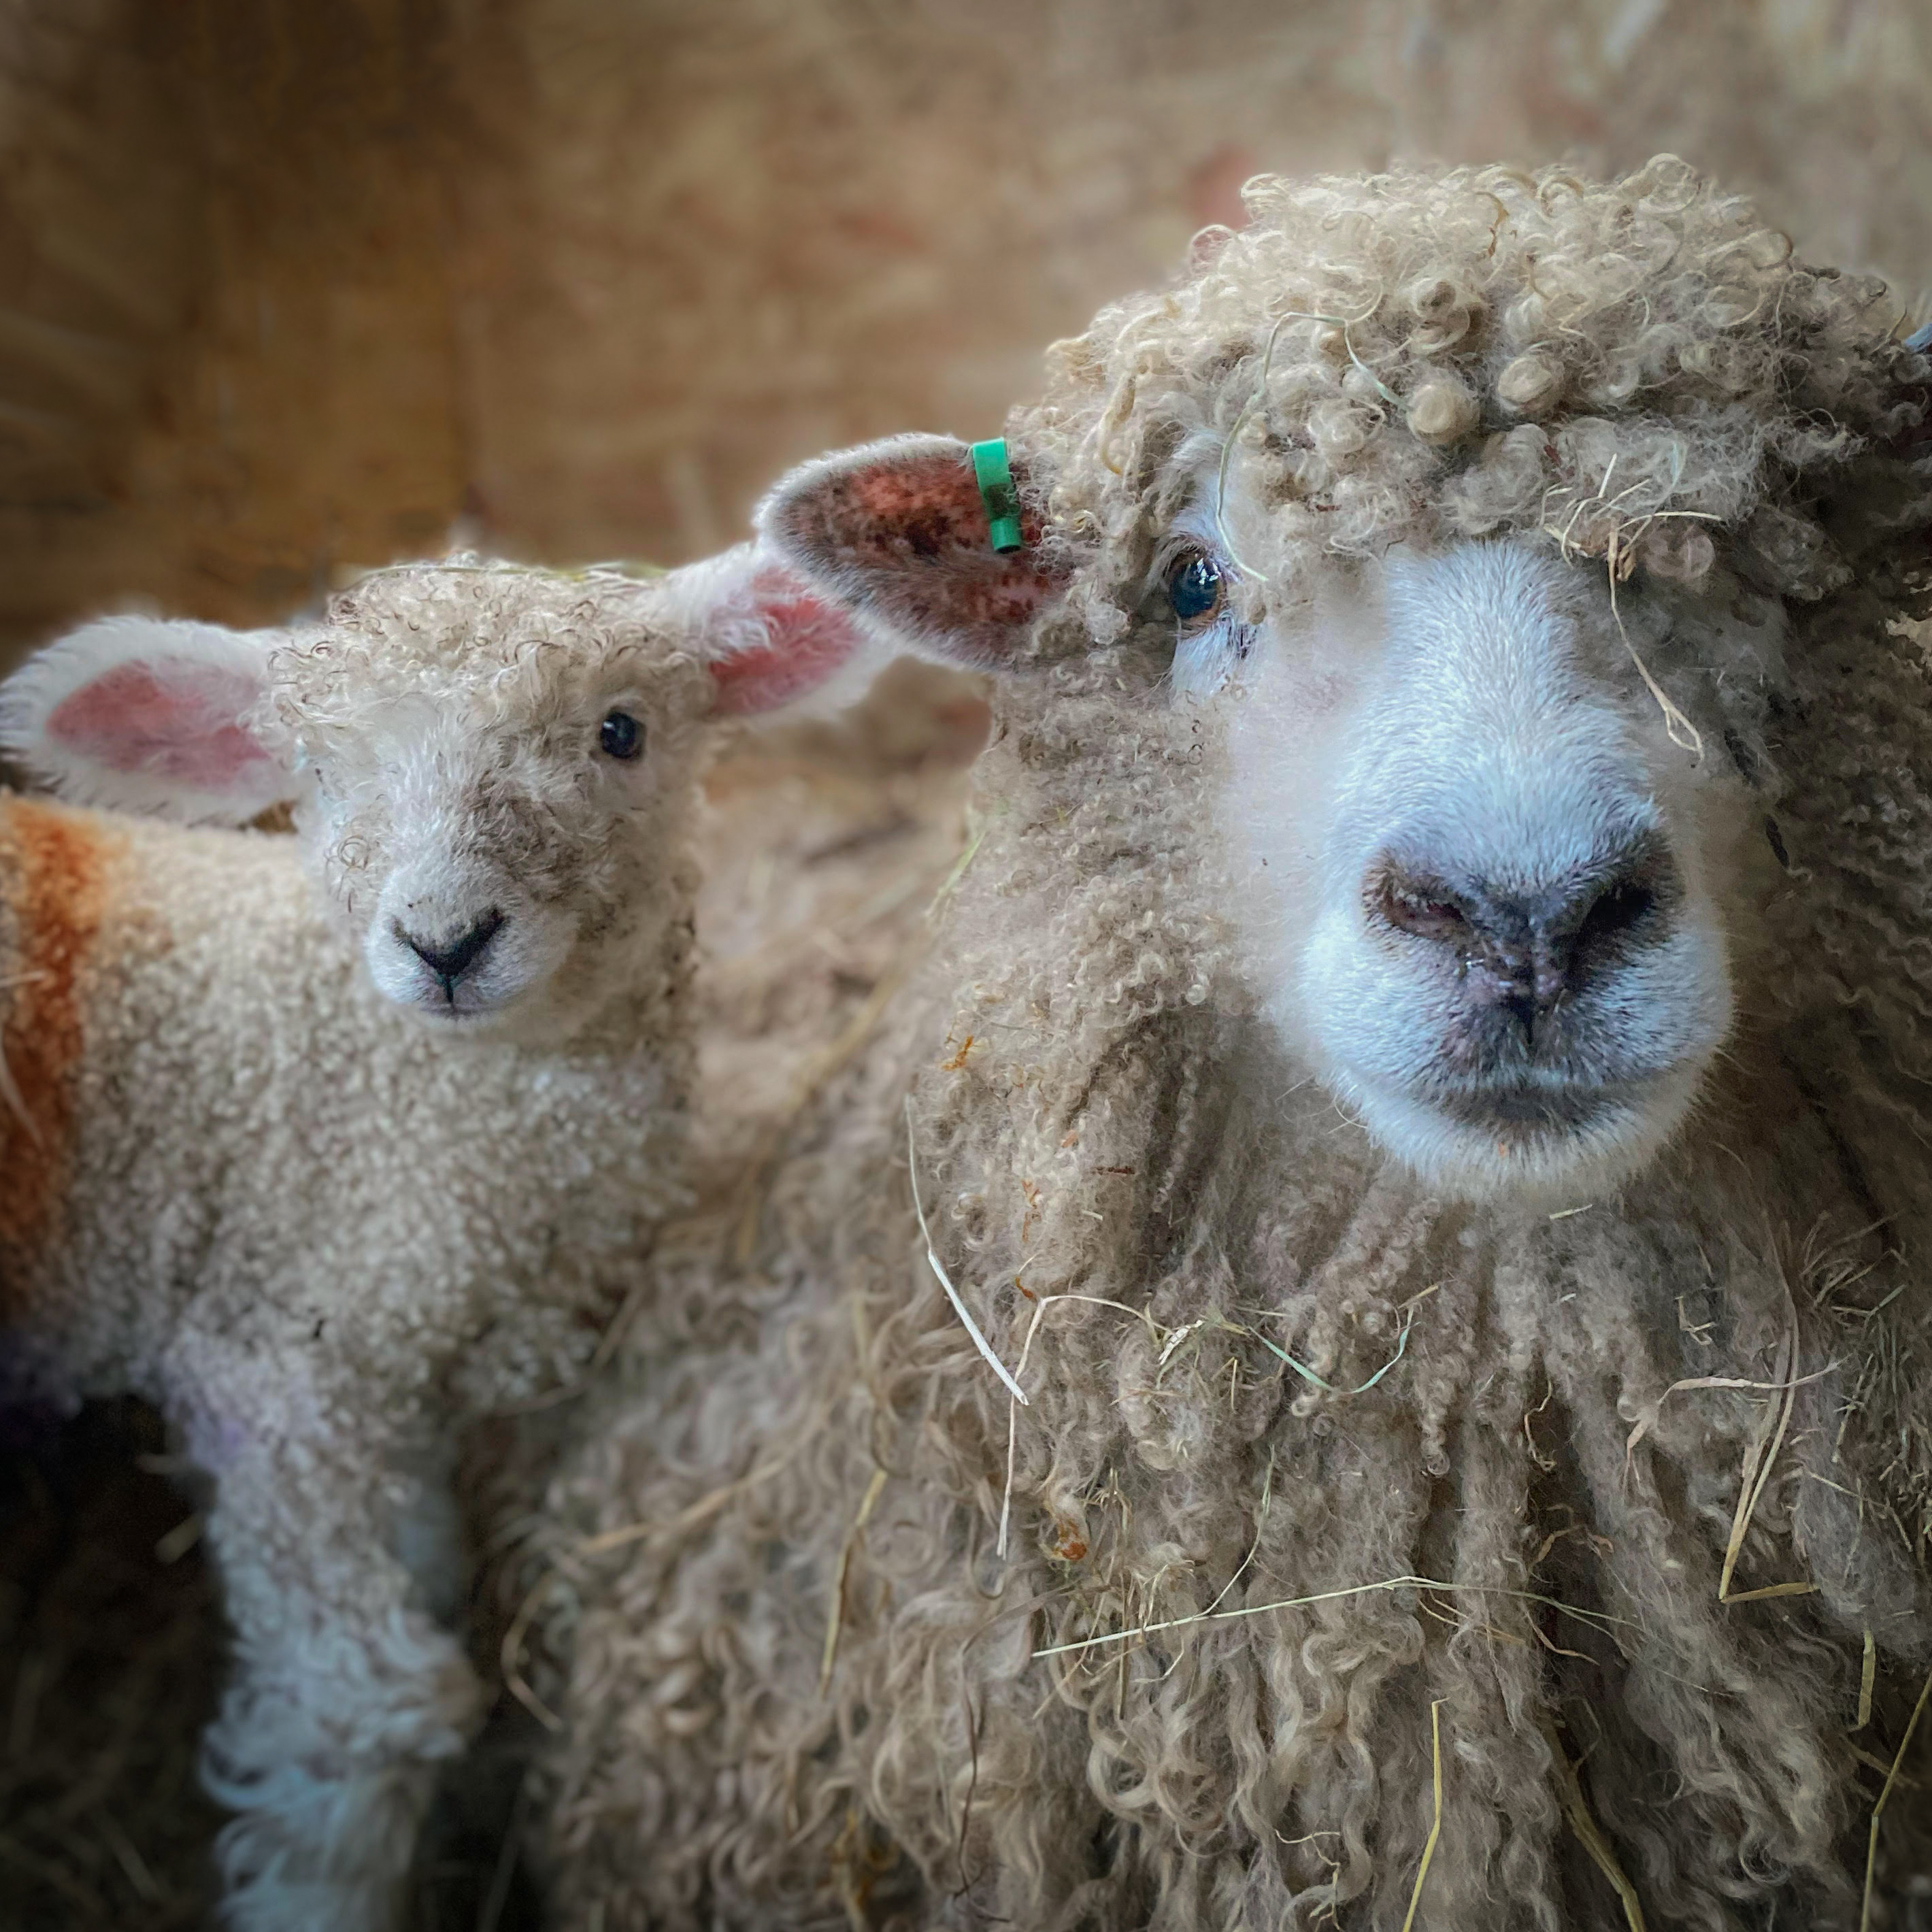 https://www.lincolnlongwools.co.uk/wp-content/uploads/2022/02/Home-page-2nd-pic-Lincoln-Longwool-Lamb-acres.jpg